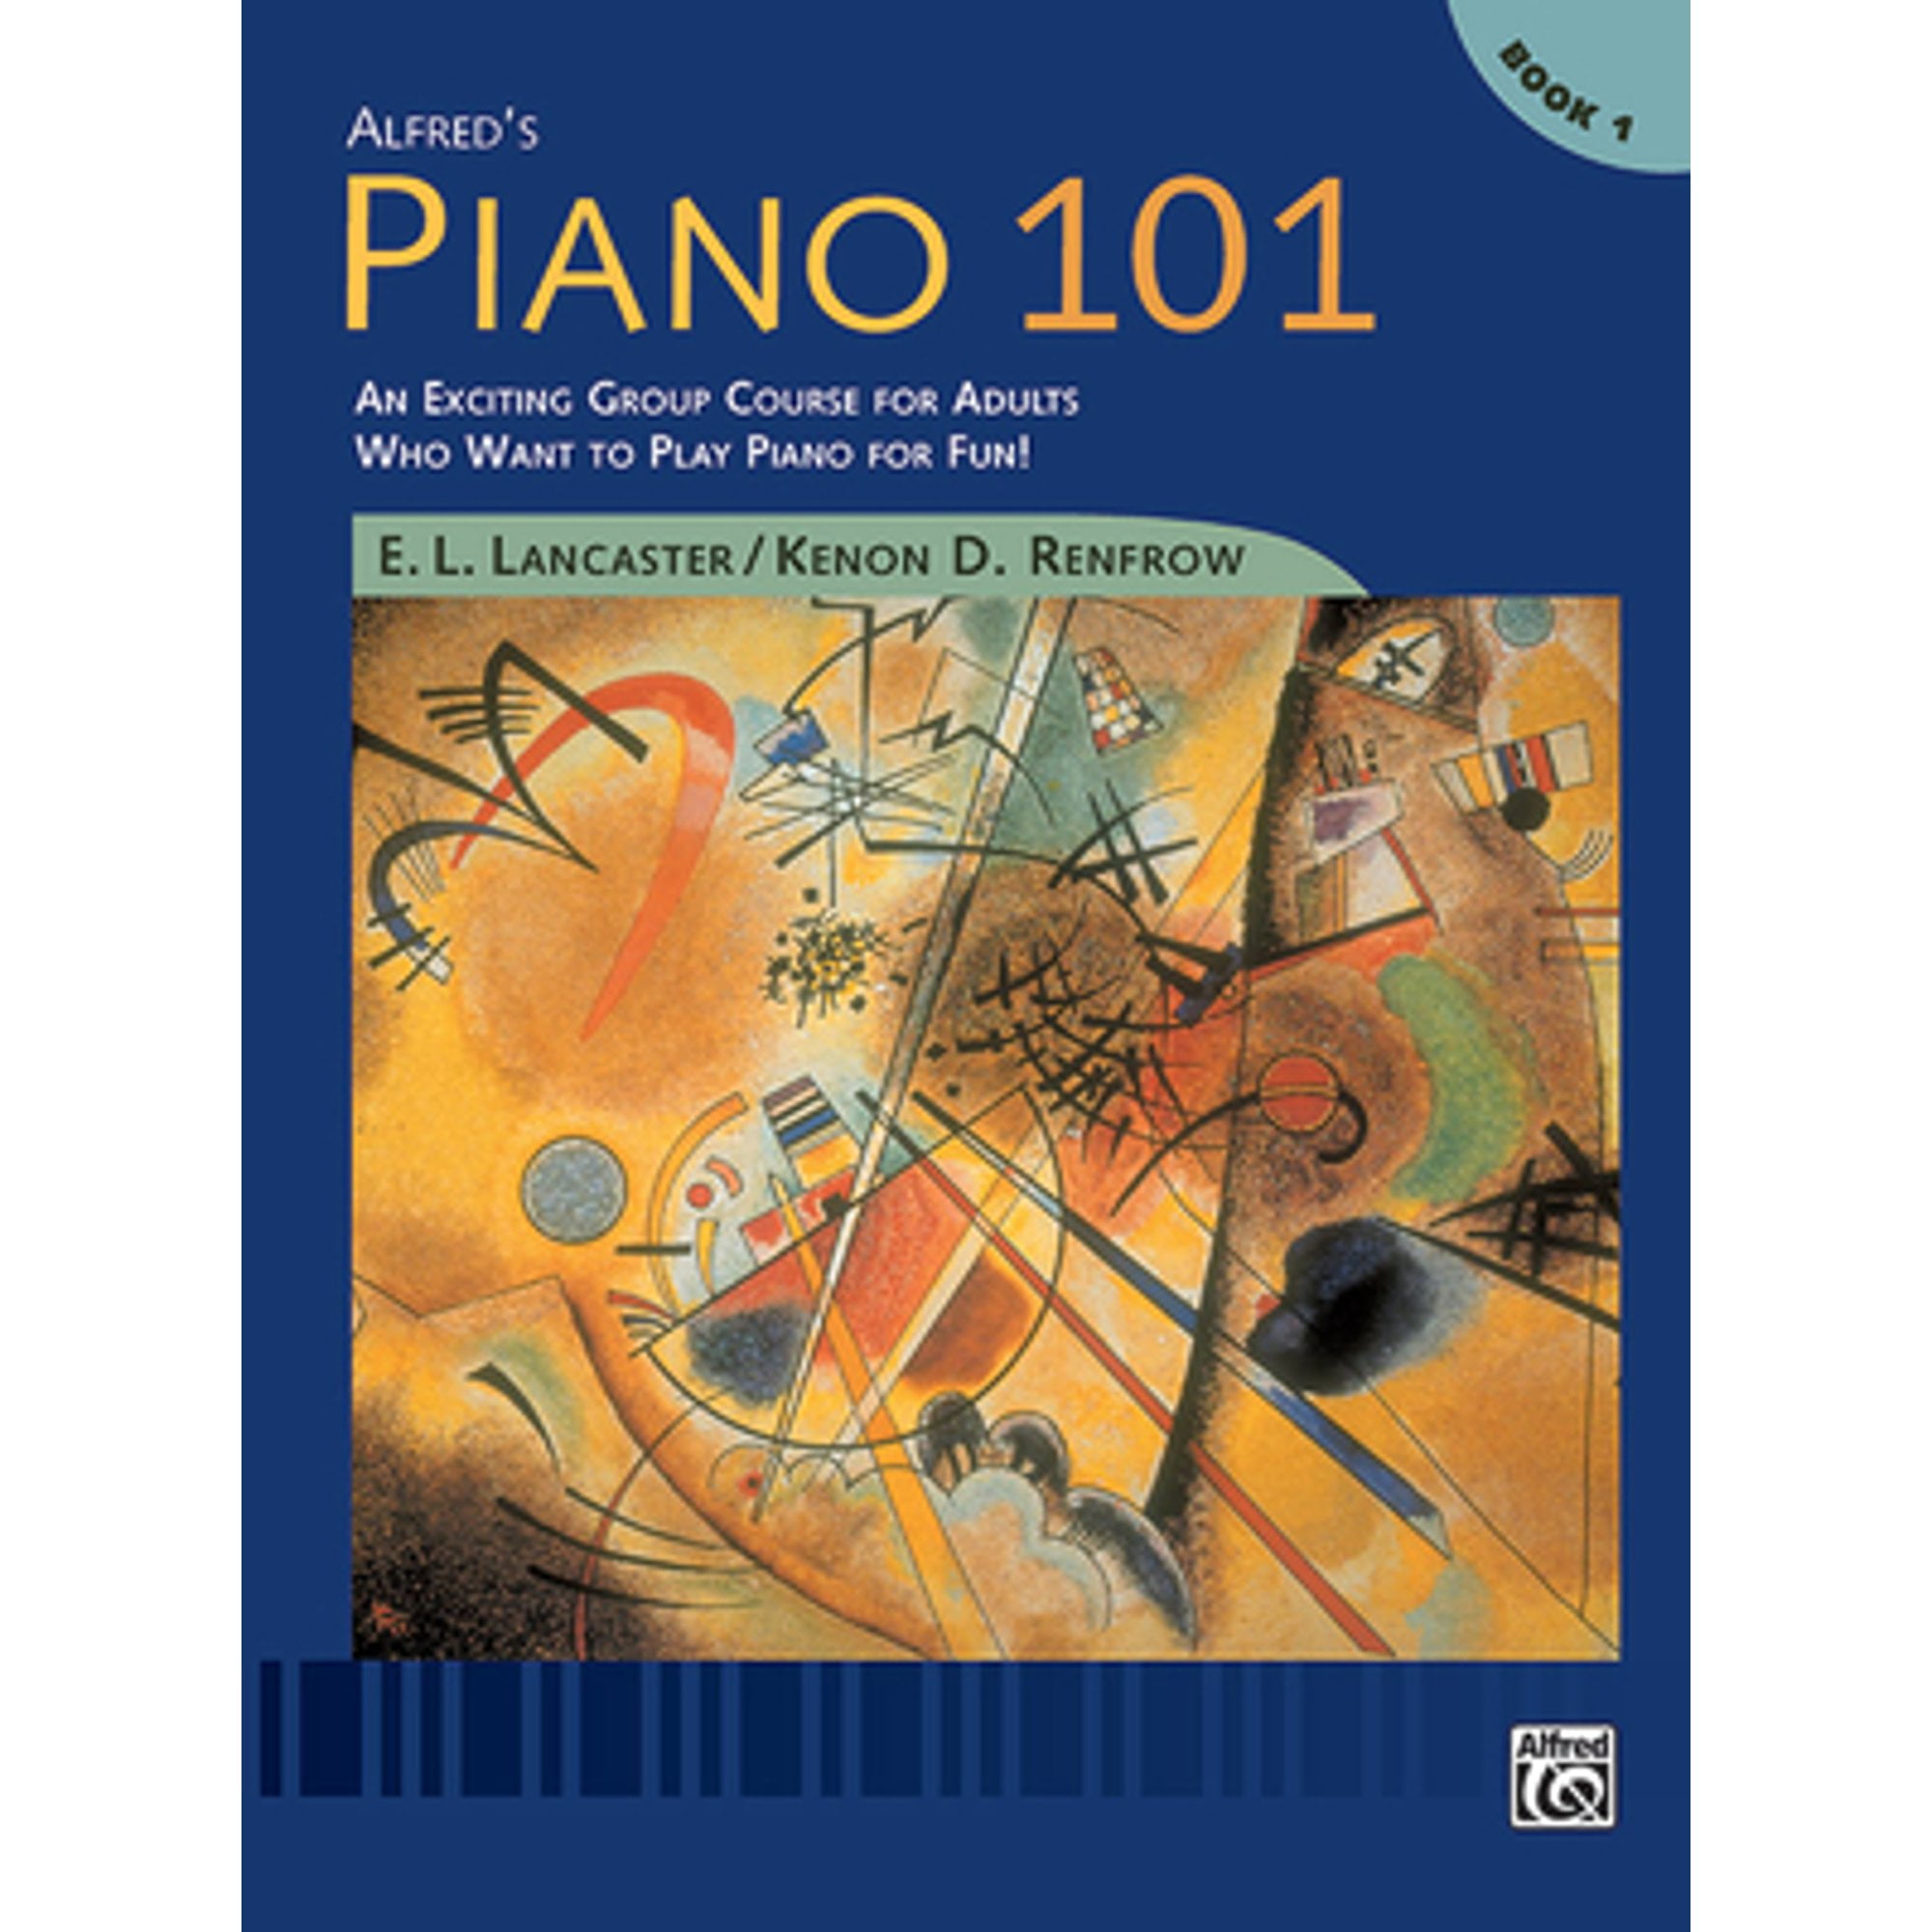 Pre-Owned Alfred's Piano 101, Bk 1: An Exciting Group Course for Adults Who Want to Play Piano for (Paperback 9780739002551) by E L Lancaster, Kenon D Renfrow